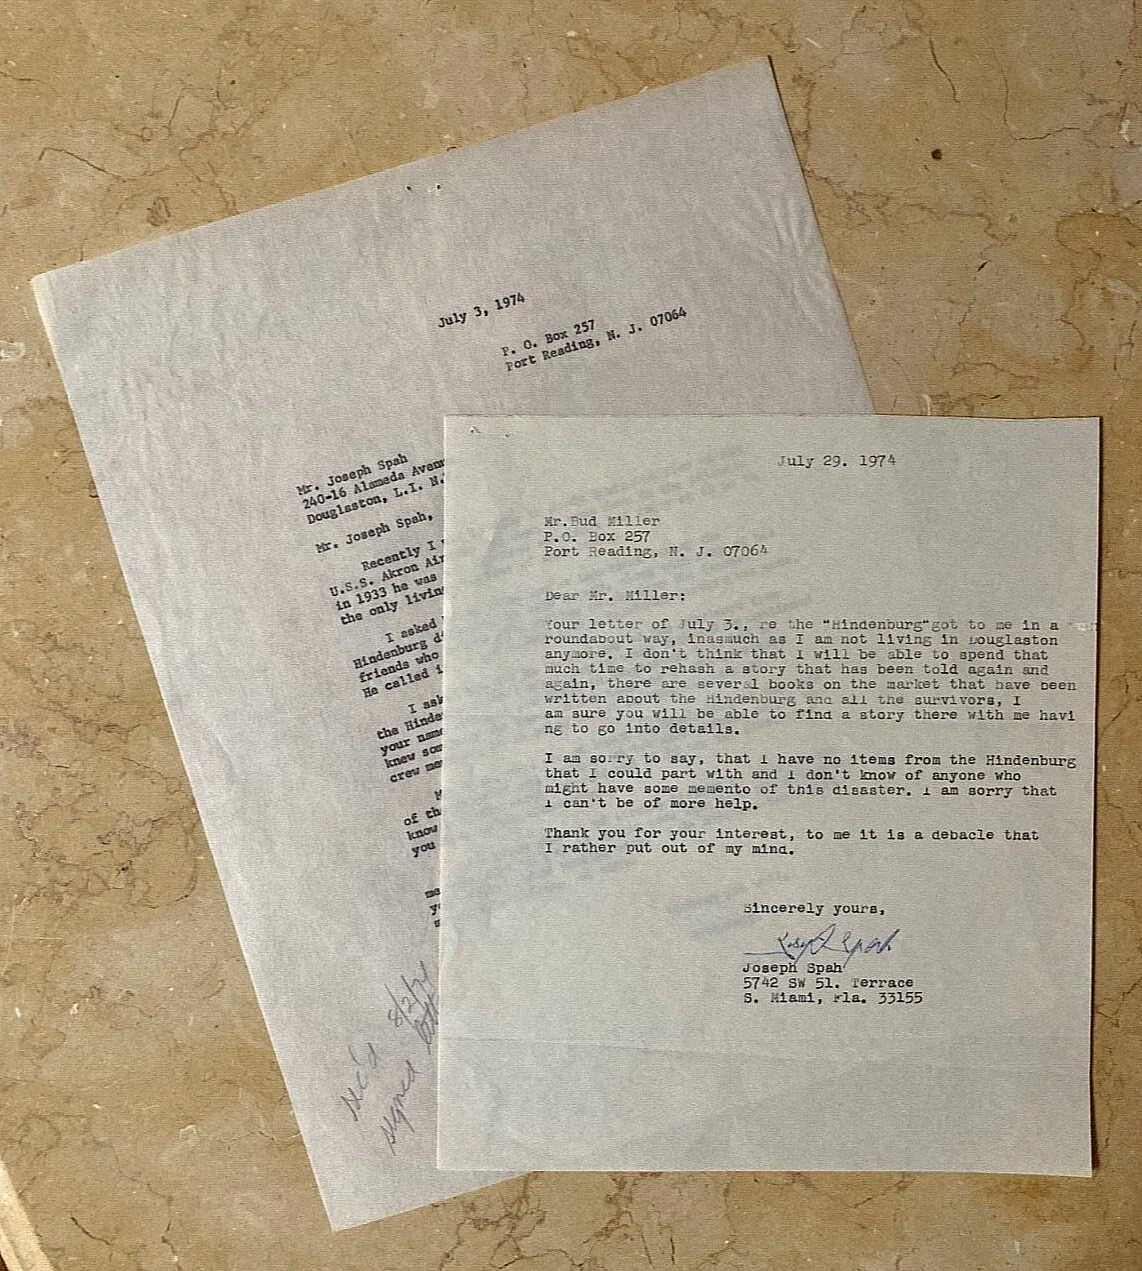 SUSPECTED SABOTEUR OF THE HINDENBURG DISASTER JOSEPH SPAH AUTOGRAPHED TYPED LTR.